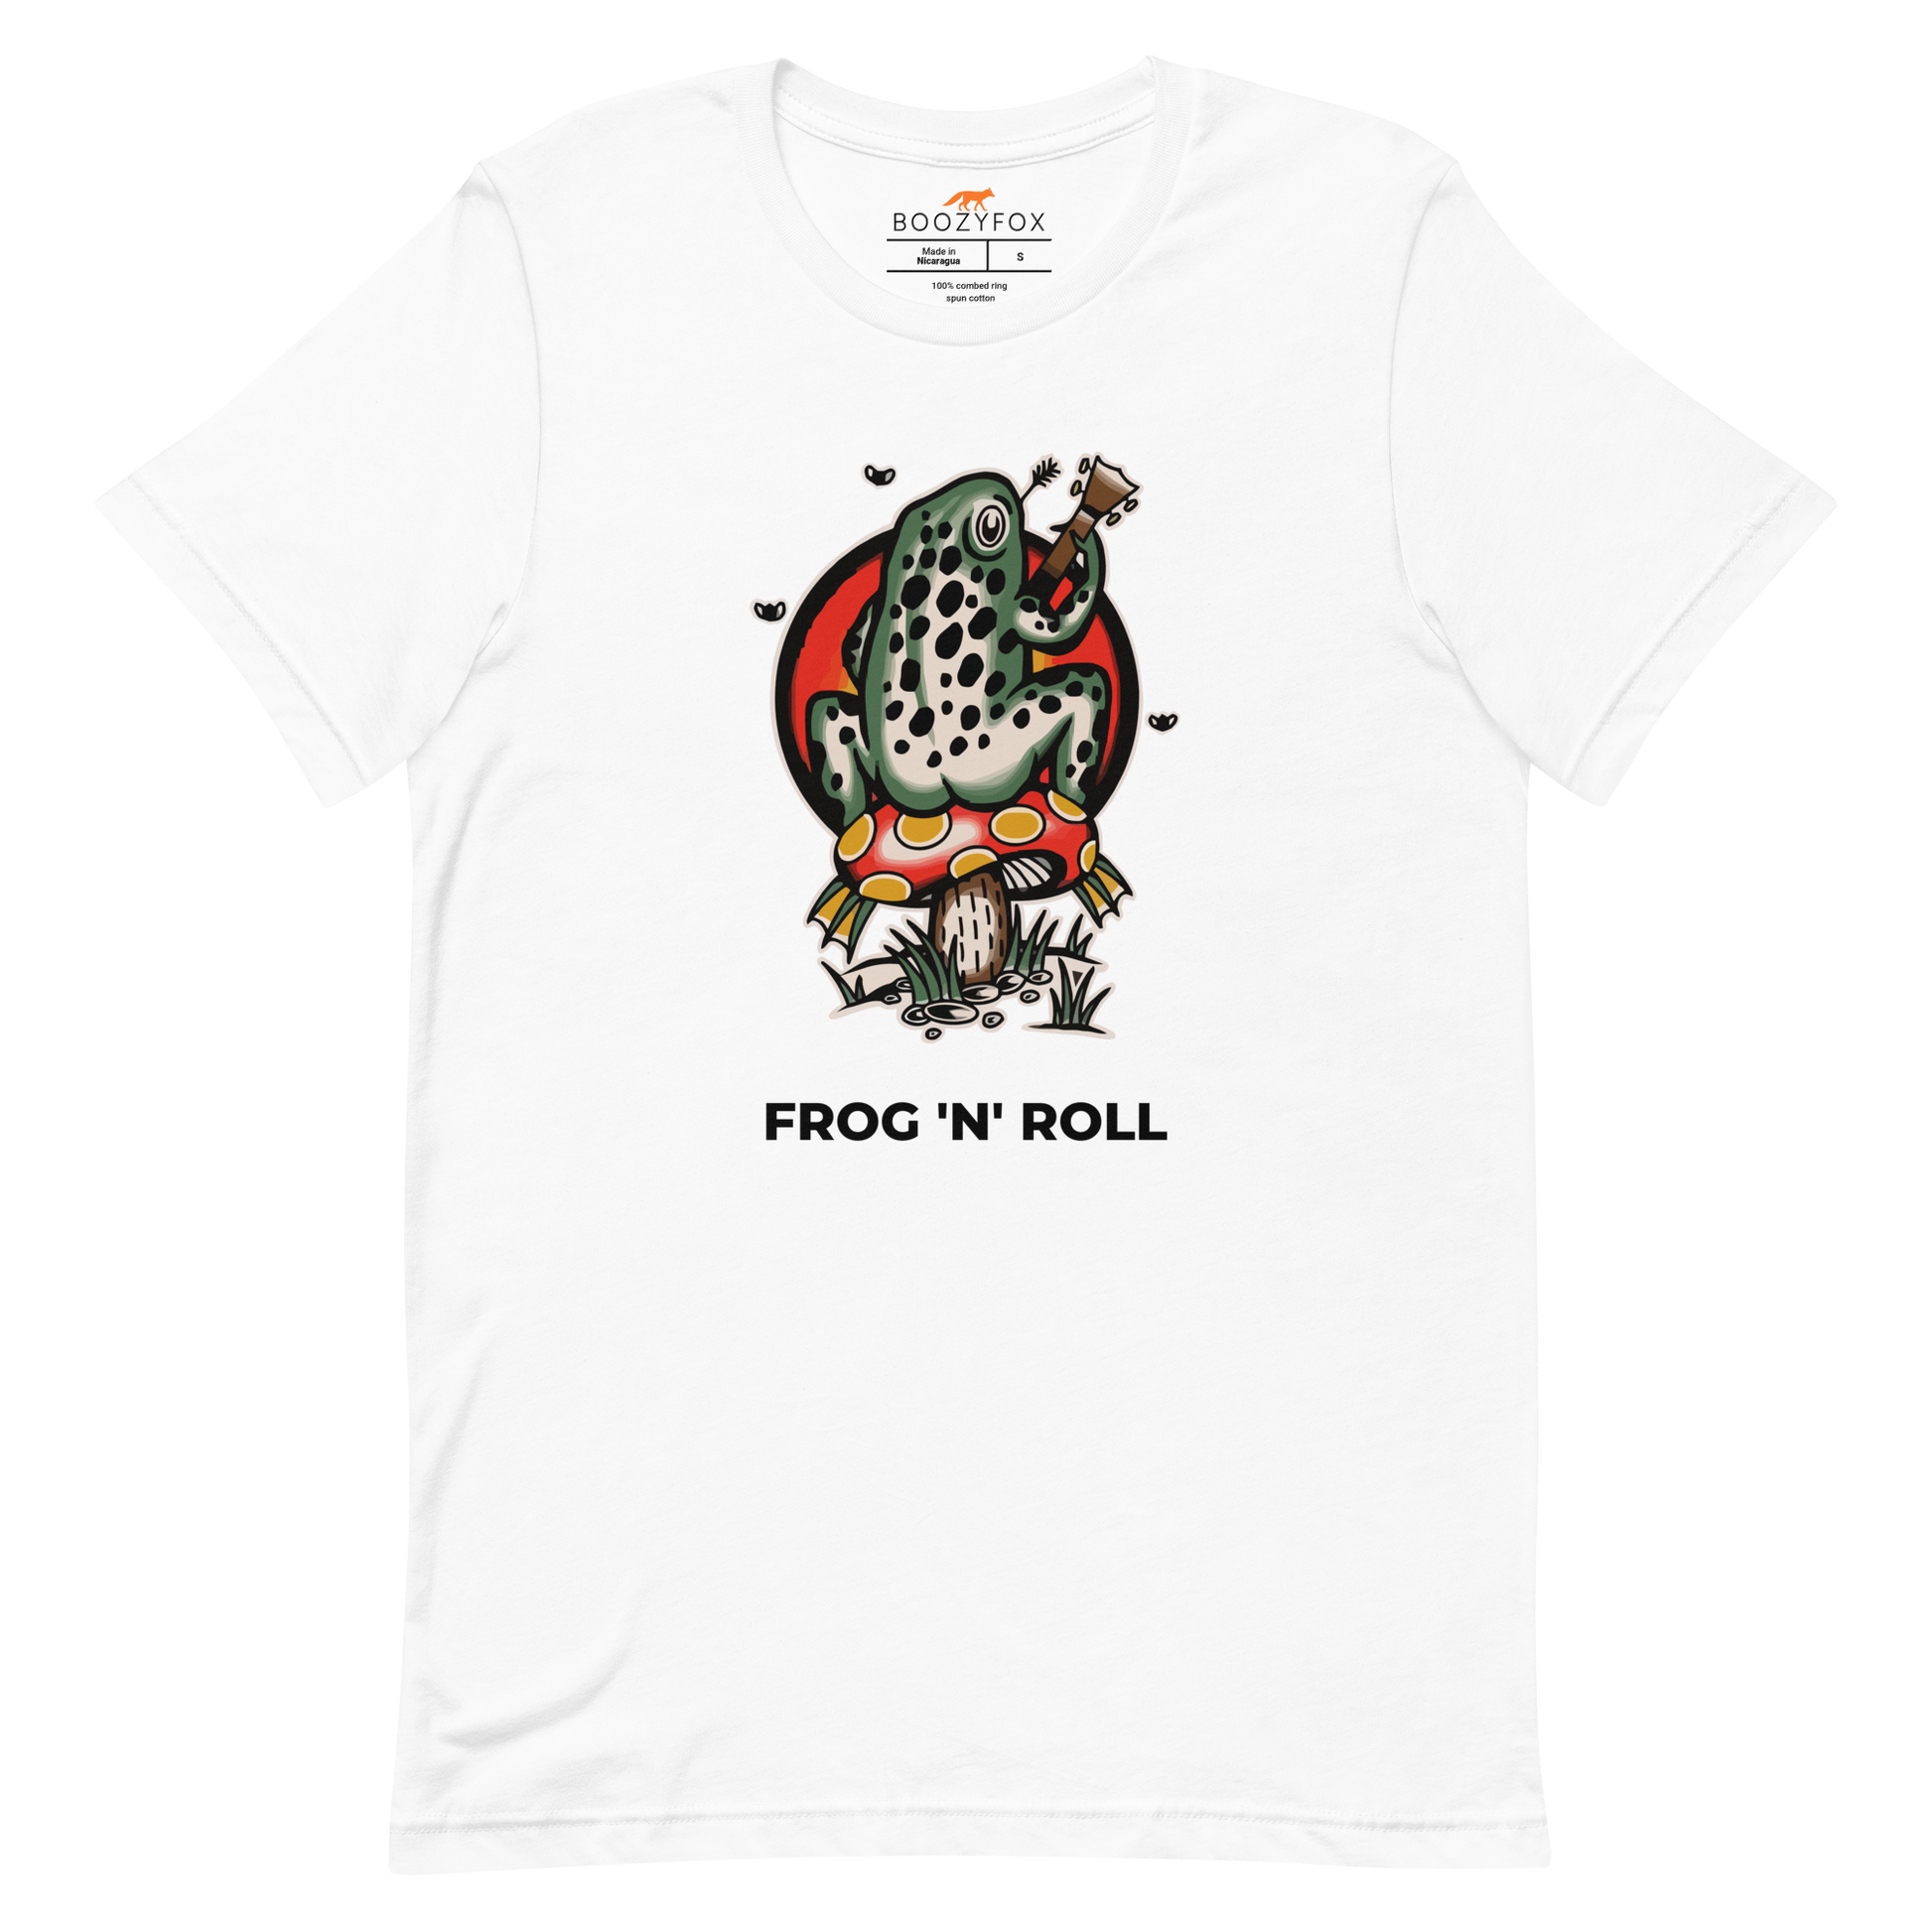 White Premium Frog Tee featuring a funny Frog 'n' Roll graphic on the chest - Funny Graphic Frog Tees - Boozy Fox